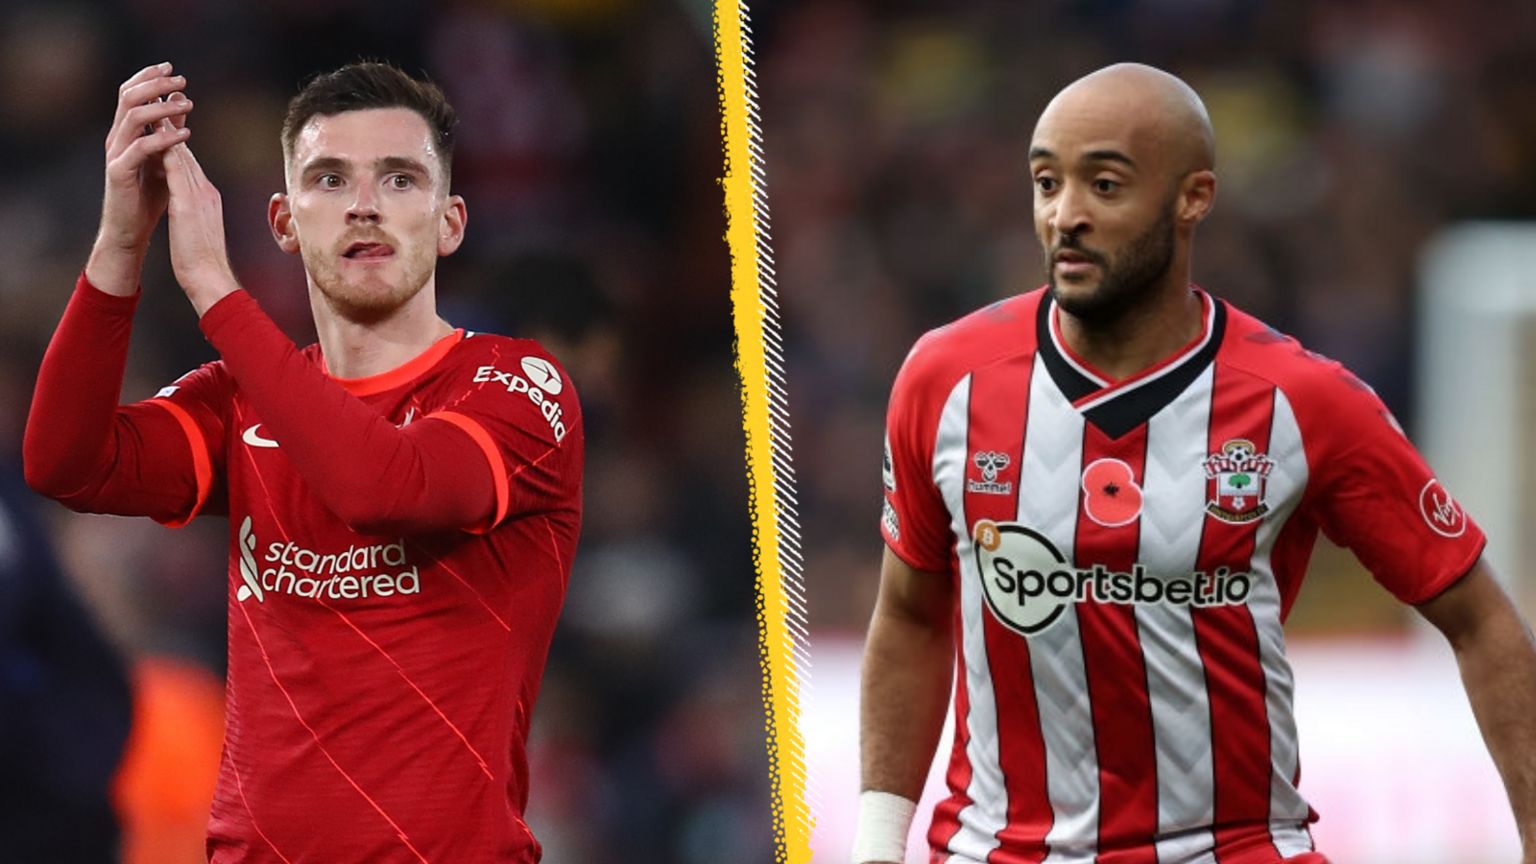 Liverpool's Andy Robertson and Southampton's Nathan Redmond are both available for Saturday's meeting at Anfield